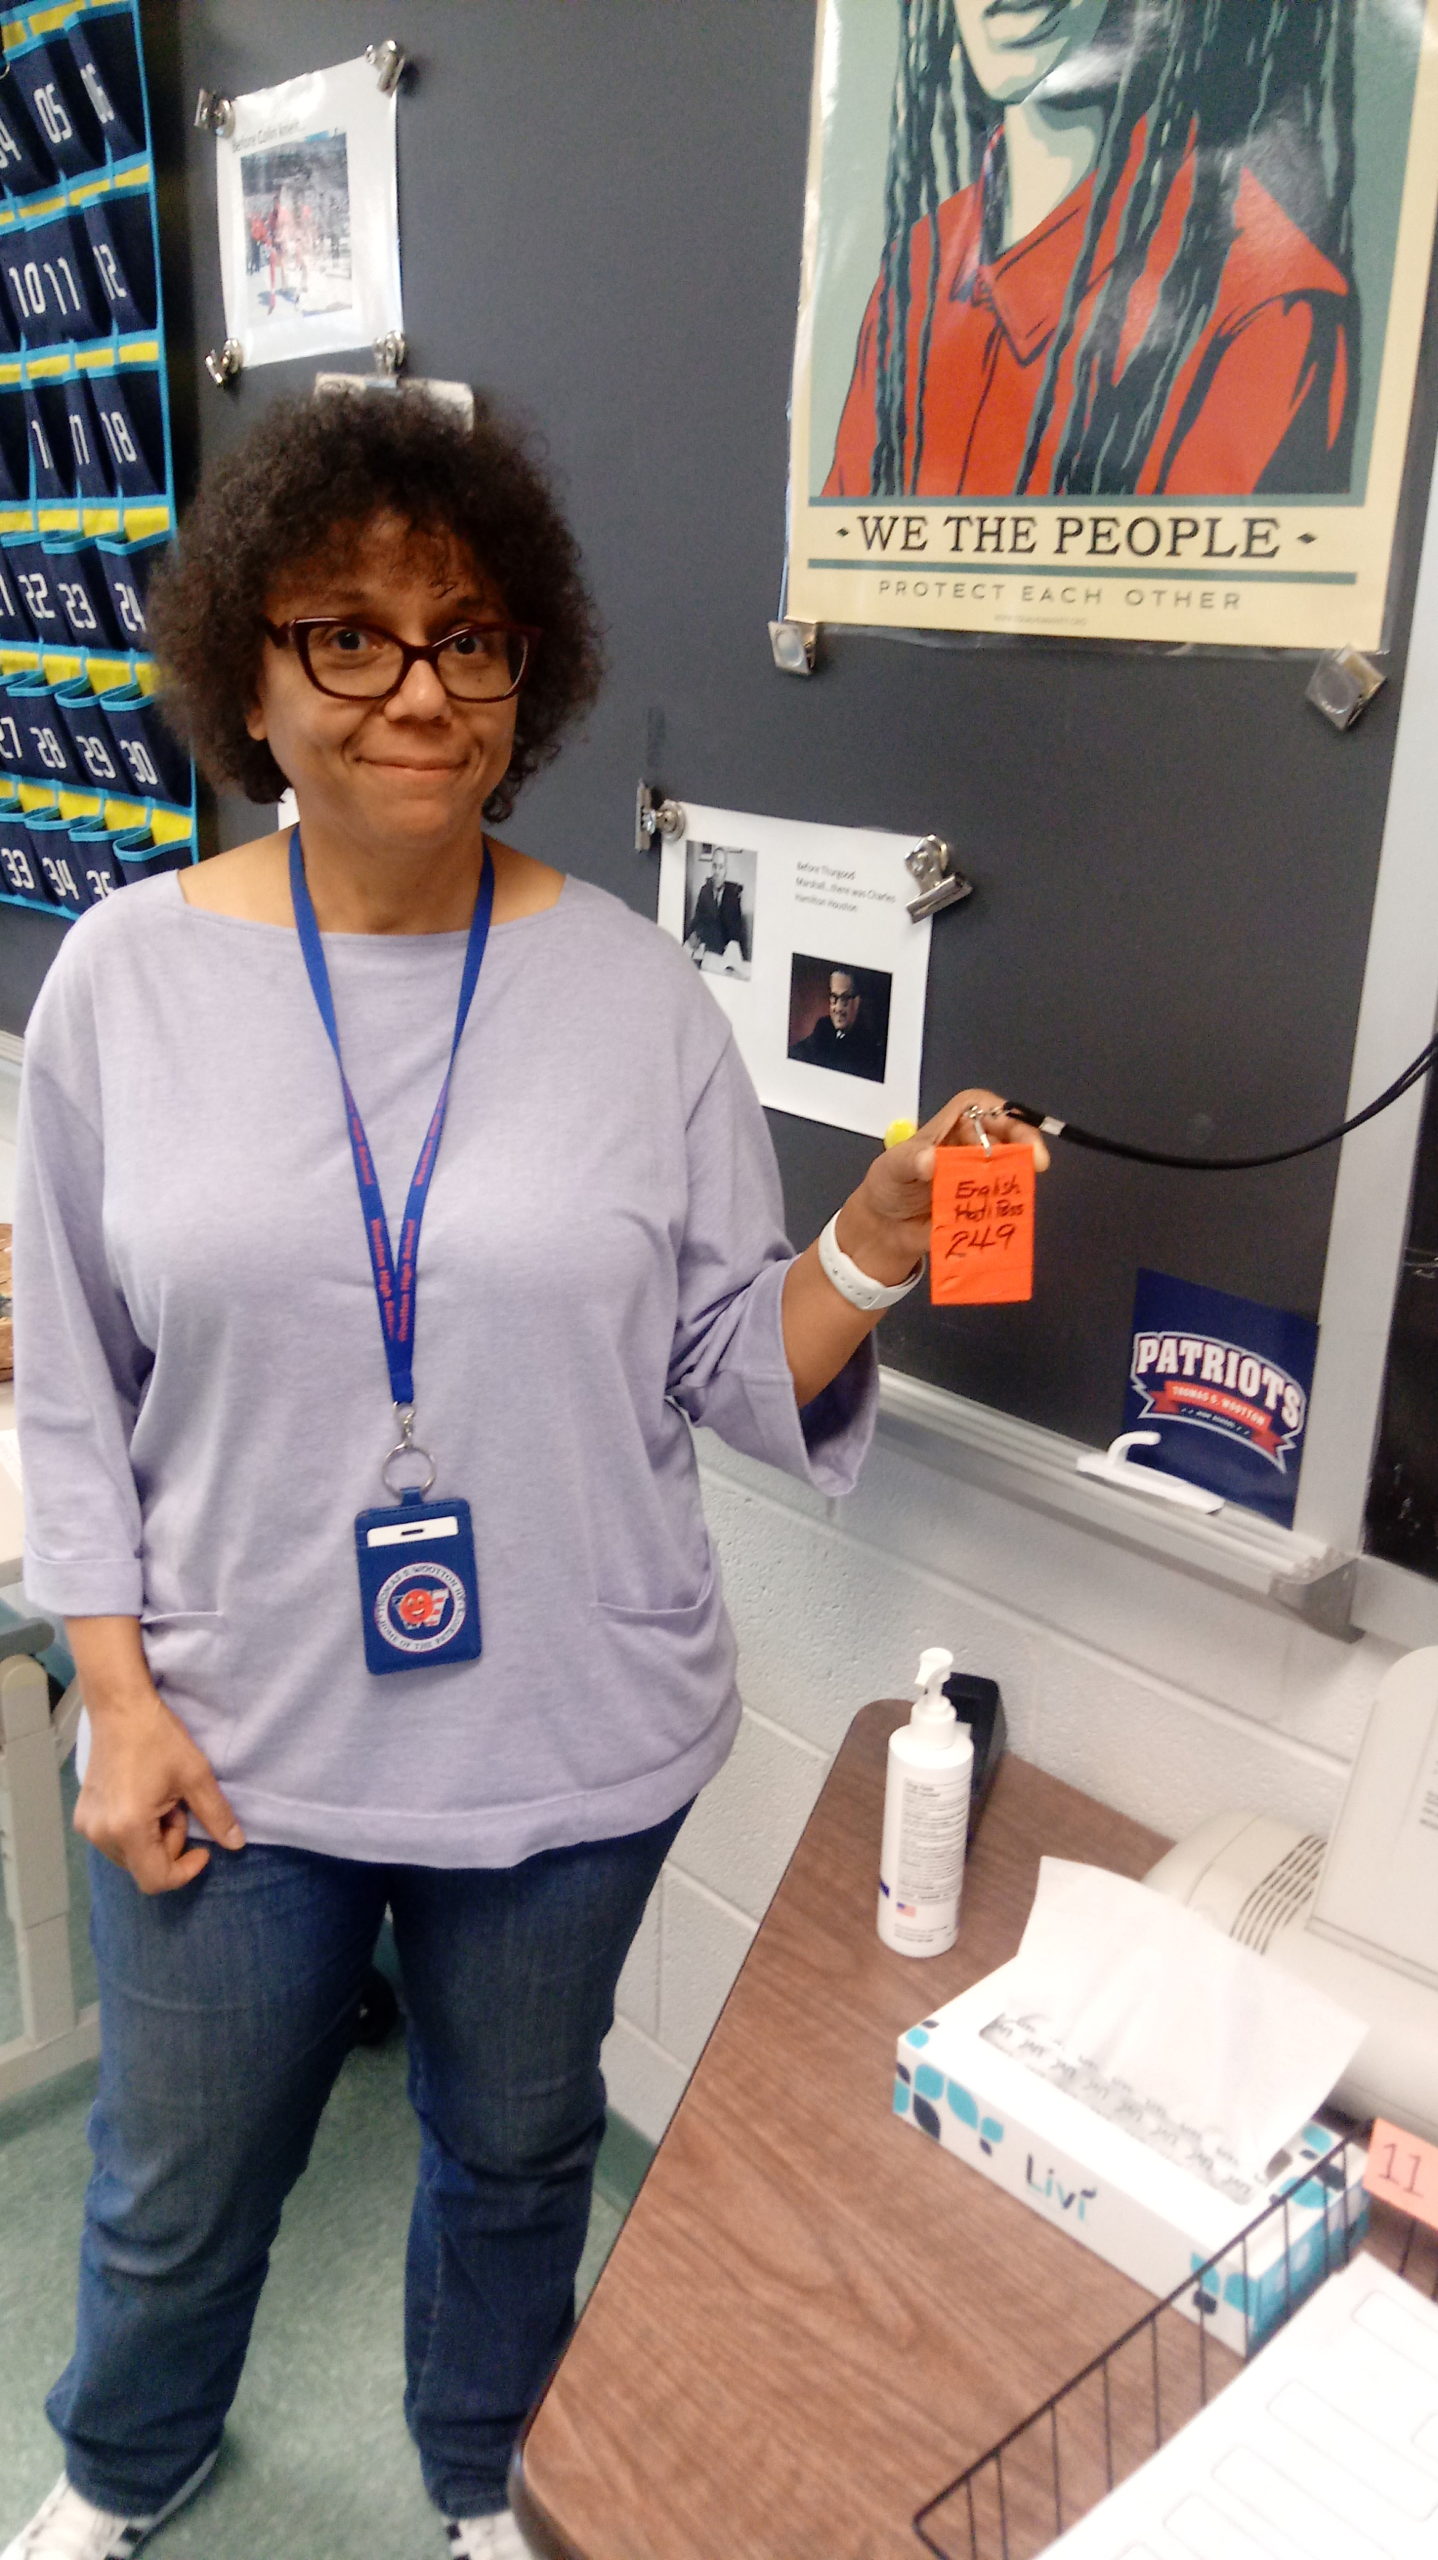 English teacher Dominique Parker presents her self-made, hand-made hall pass. In response to the disappearance of the passes originally given, Parker made her own pass out of tape, so students could use the restroom or get water and still follow the rules.